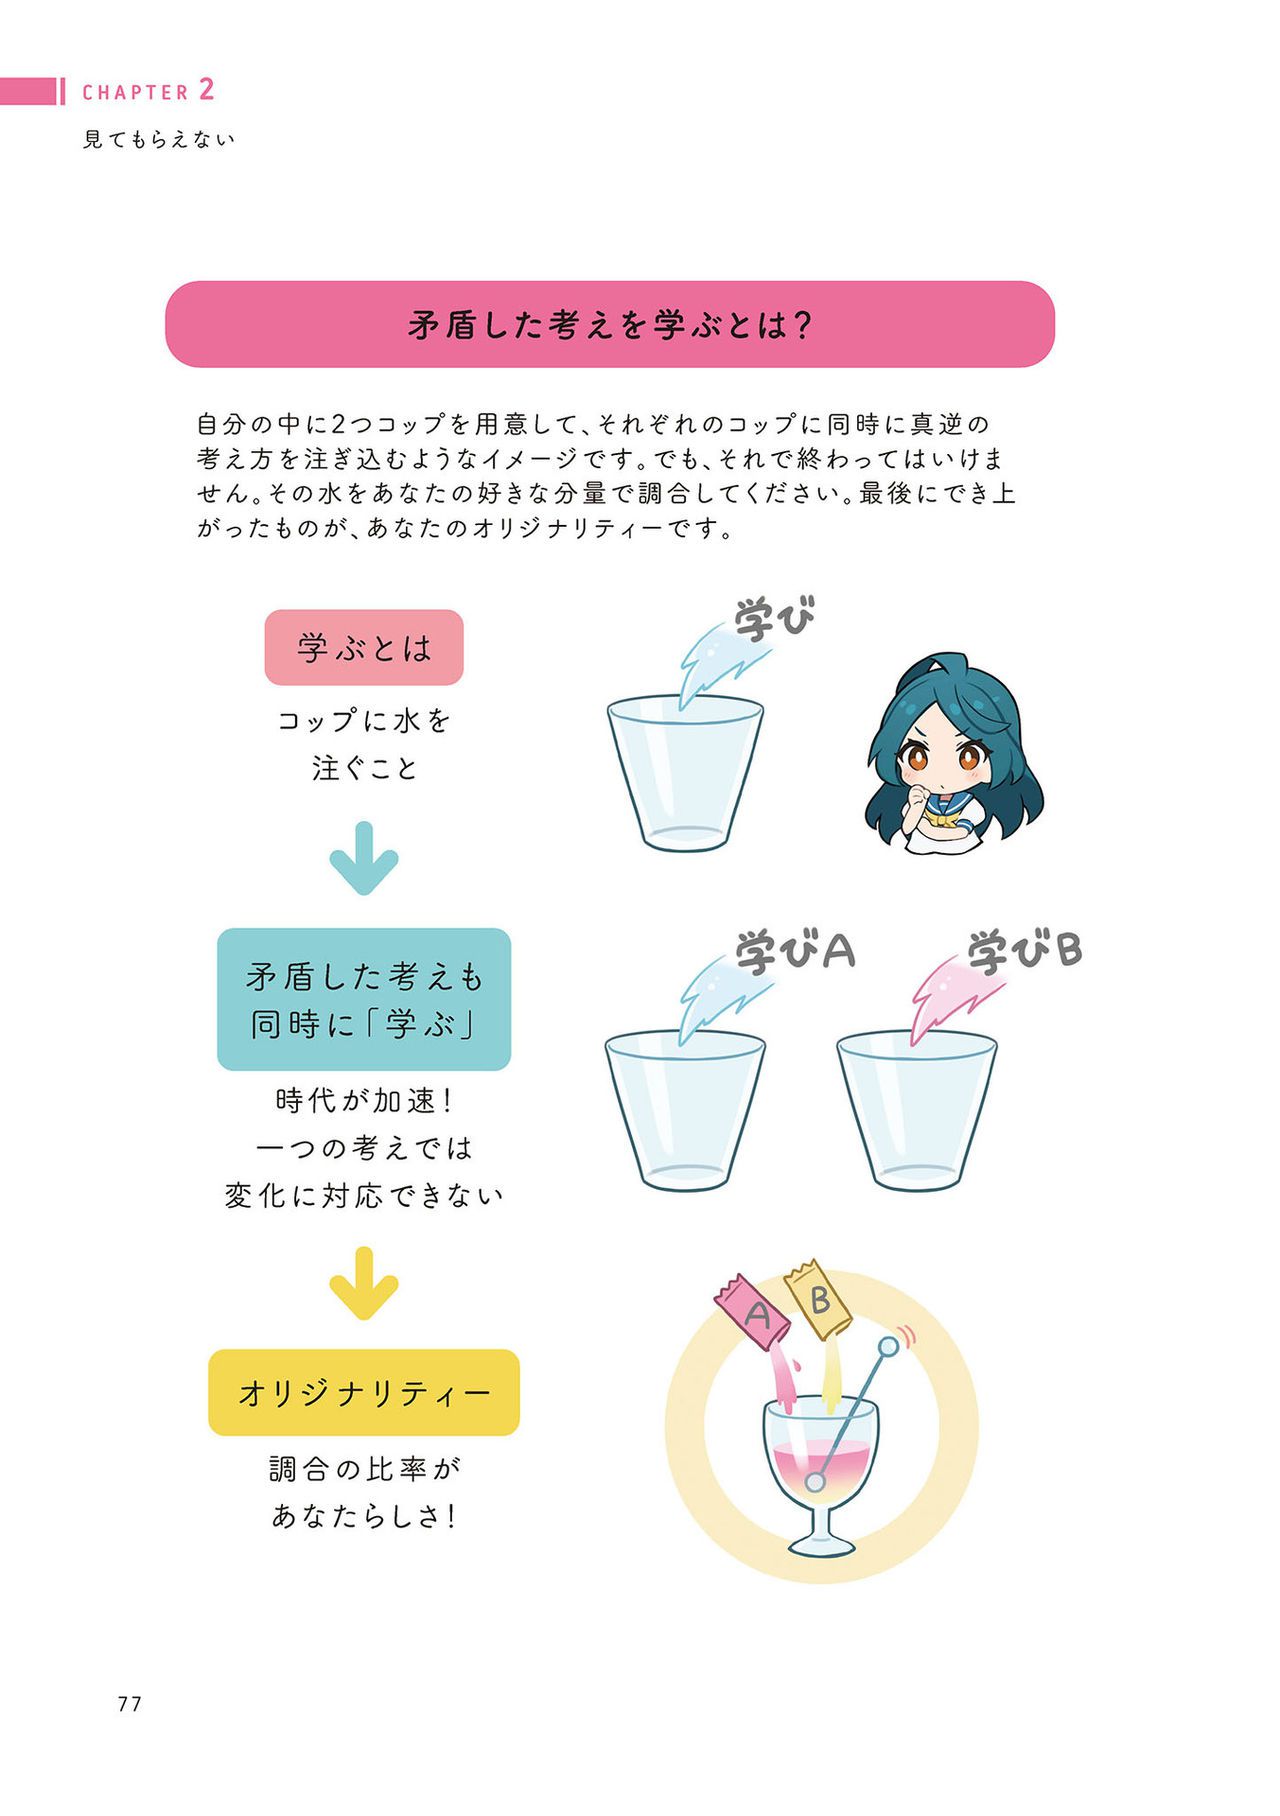 Prohibition of drawing well How to improve illustrations that are not smooth うまく描くの禁止 ツラくないイラスト上達法 78